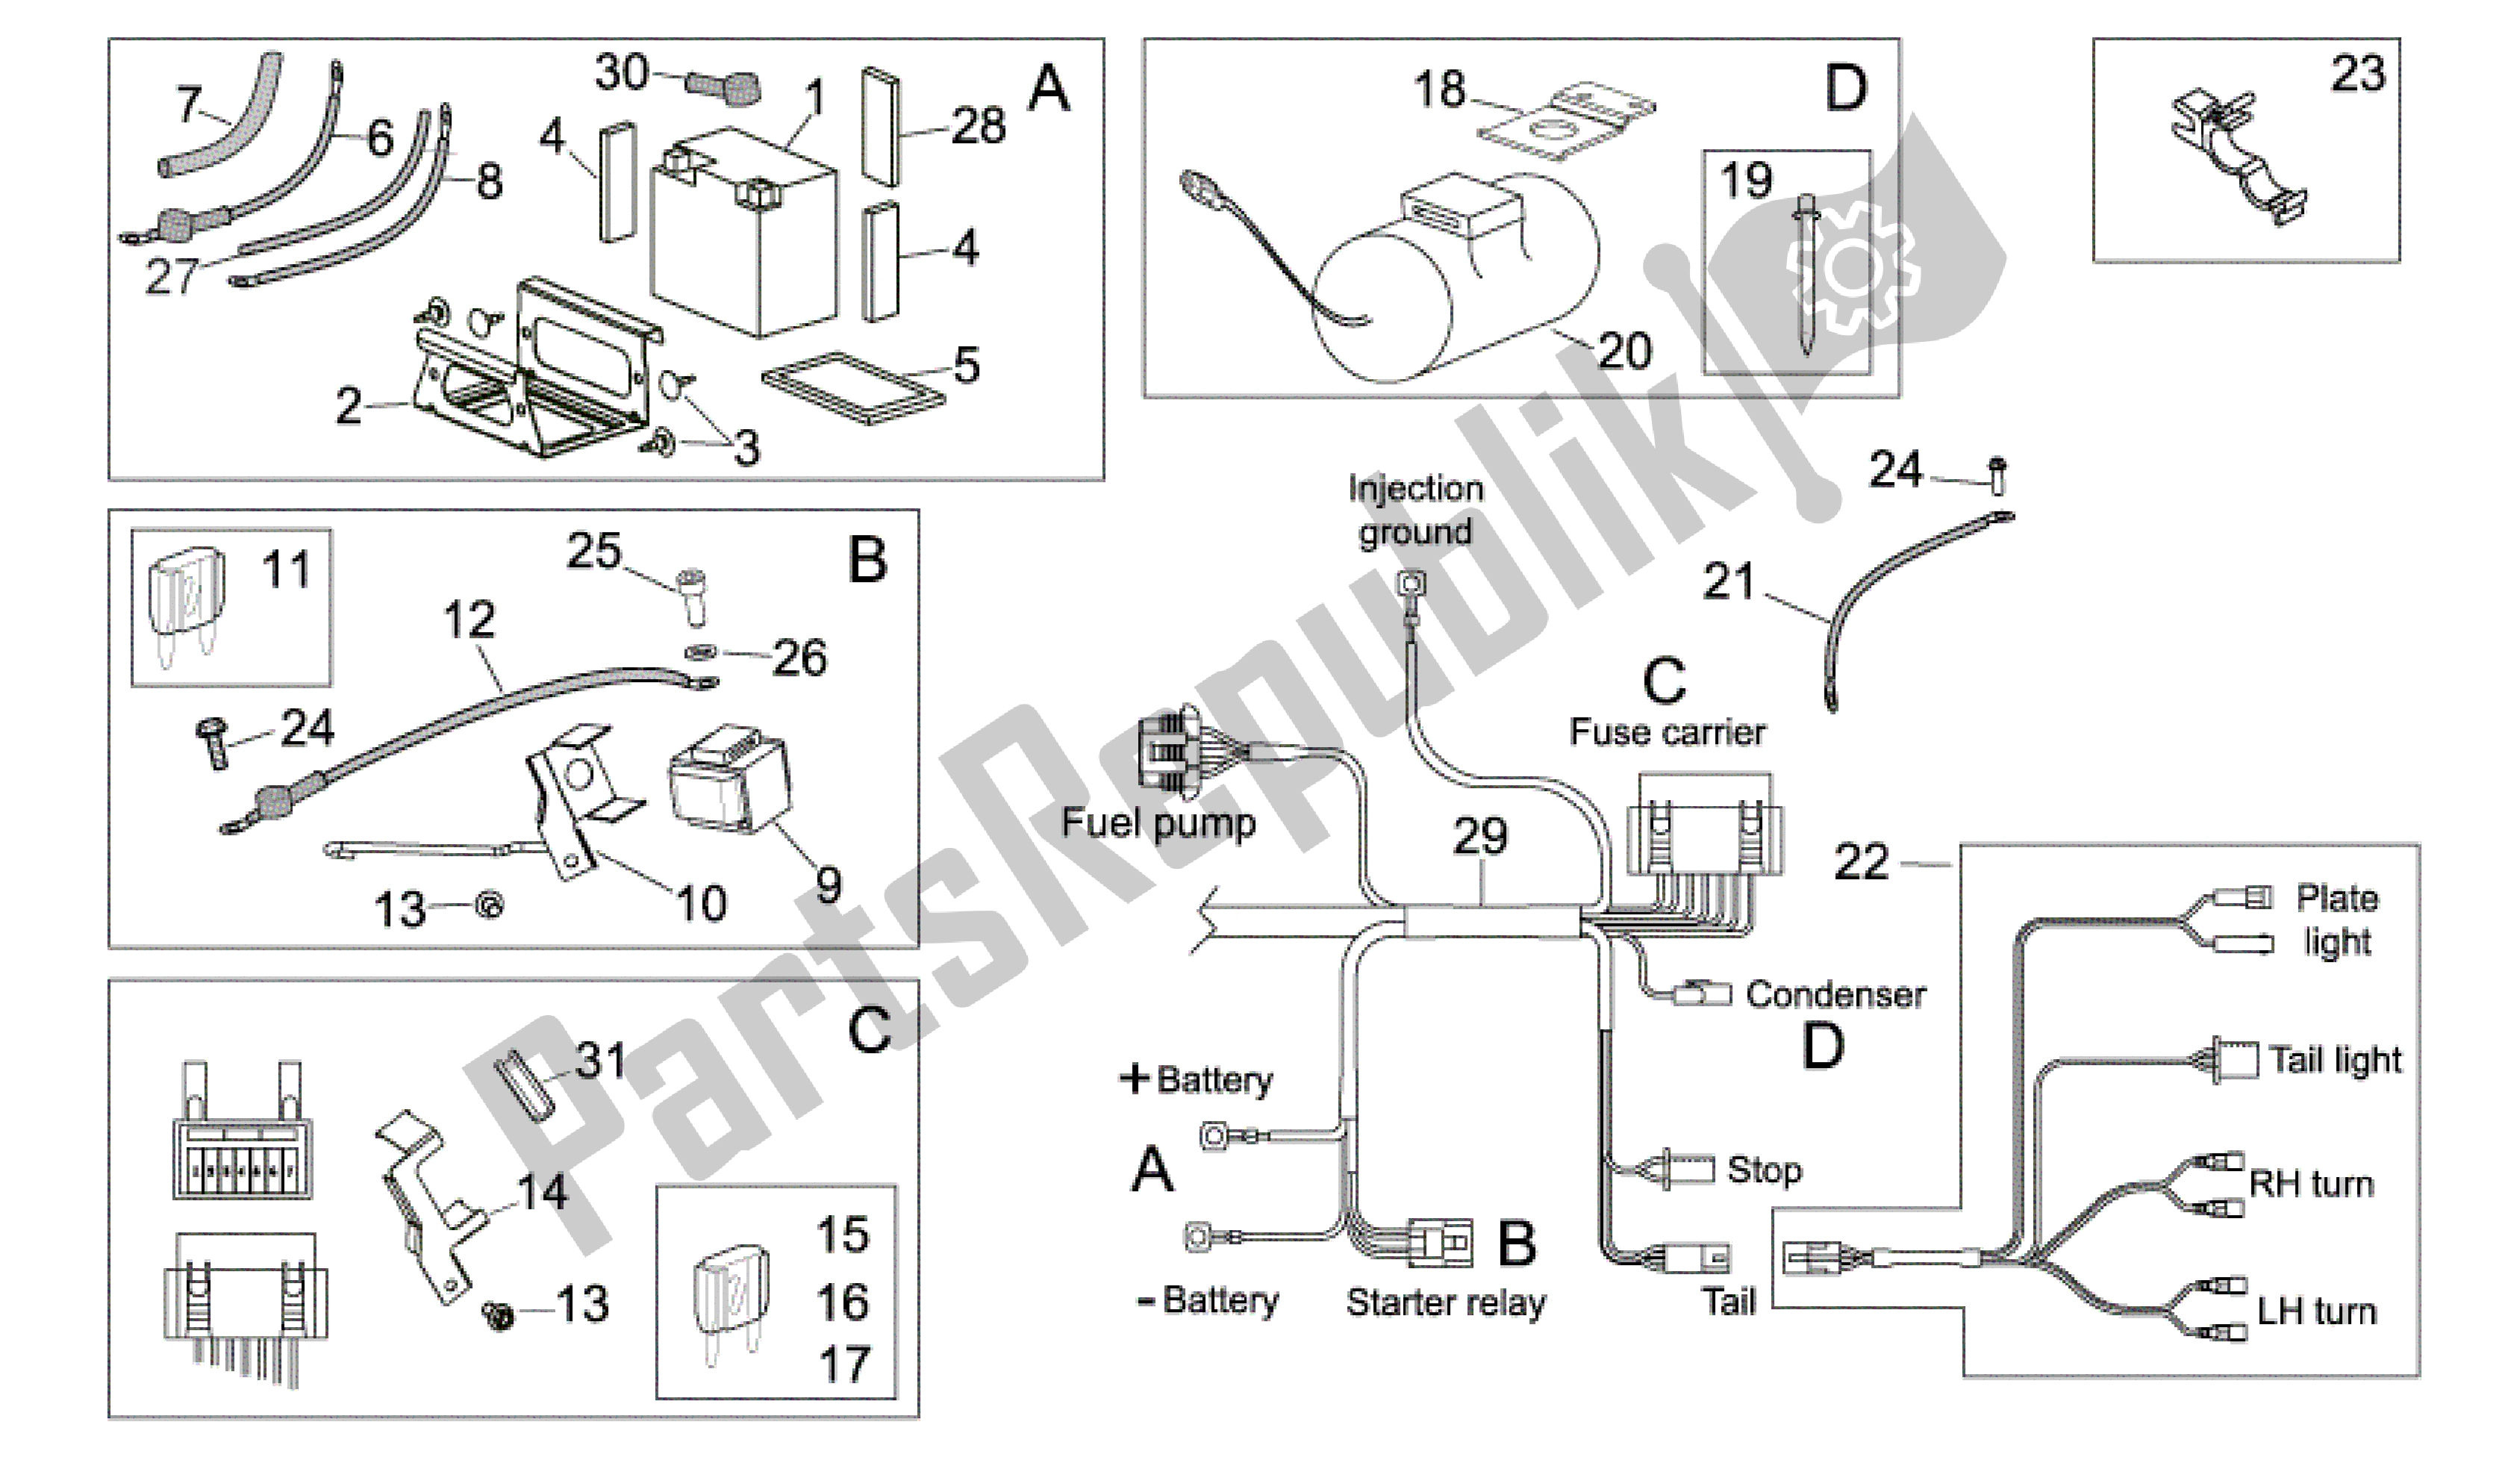 All parts for the Electrical System Ii of the Aprilia RXV 550 2009 - 2011